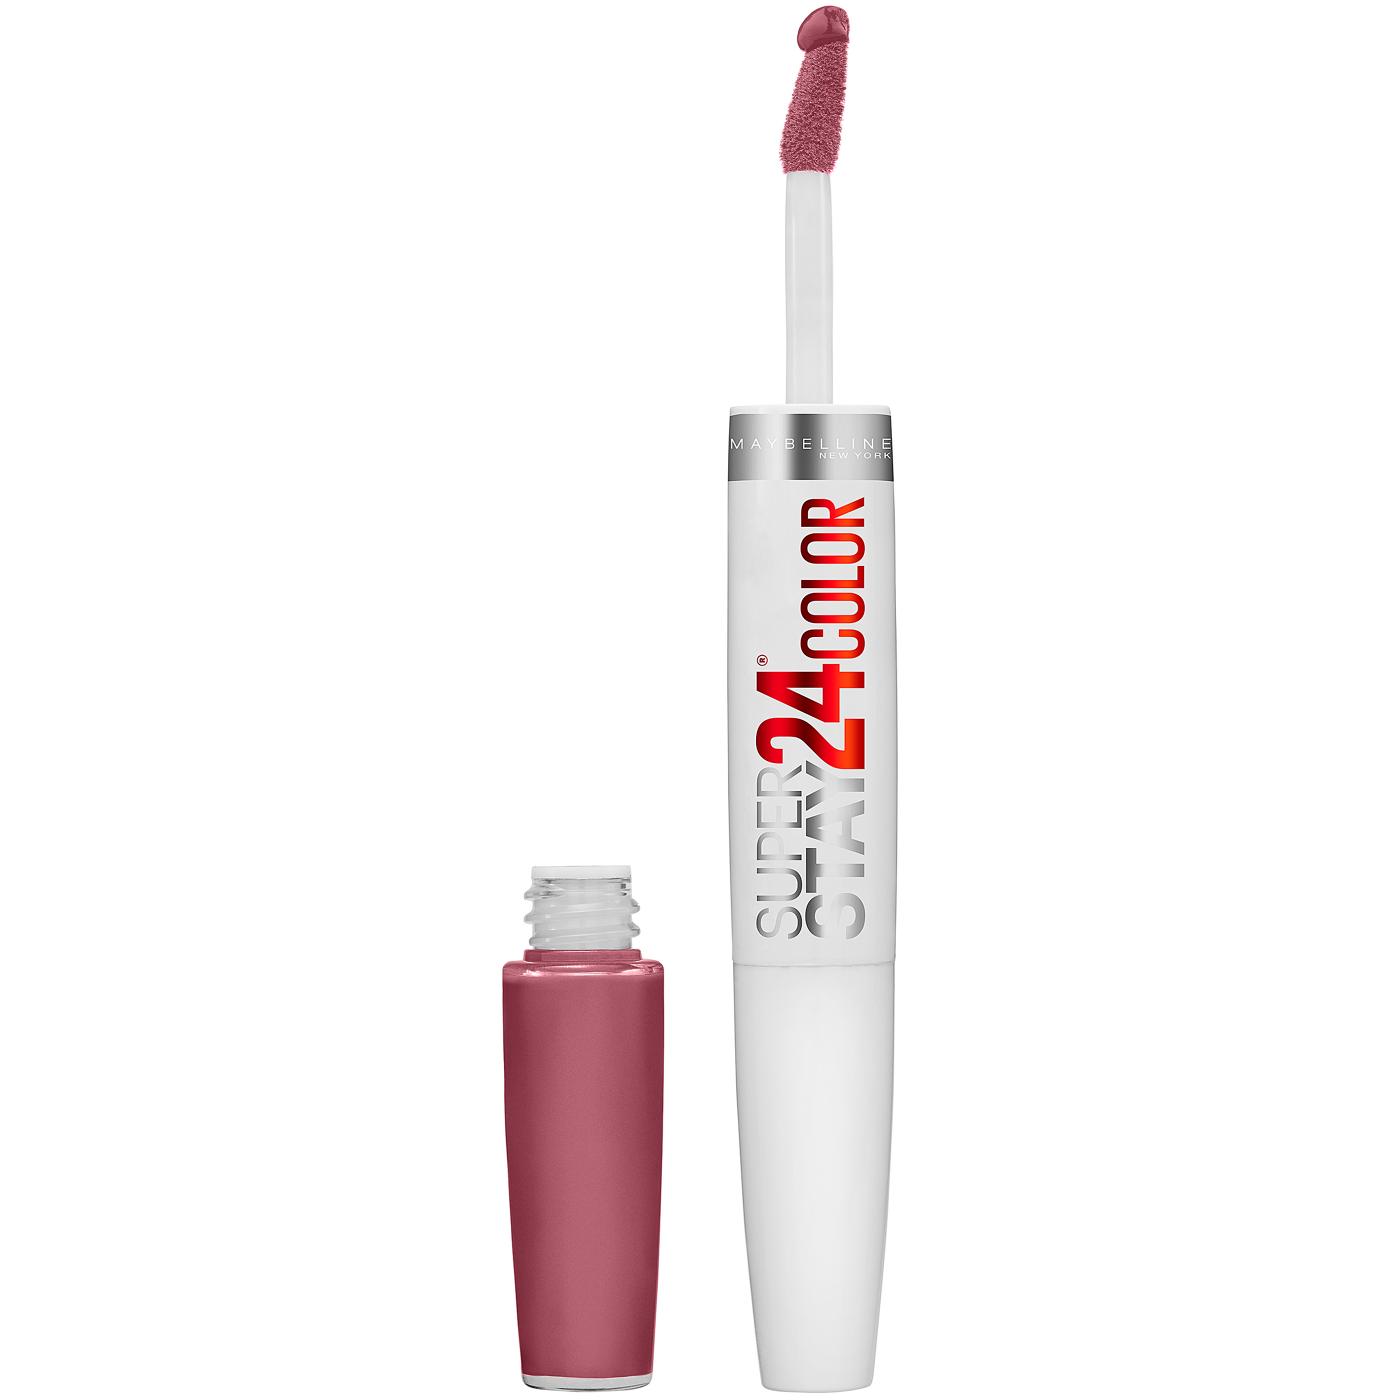 Maybelline Super Stay 24 2-Step Liquid Lipstick - Firmly Mauve; image 1 of 5